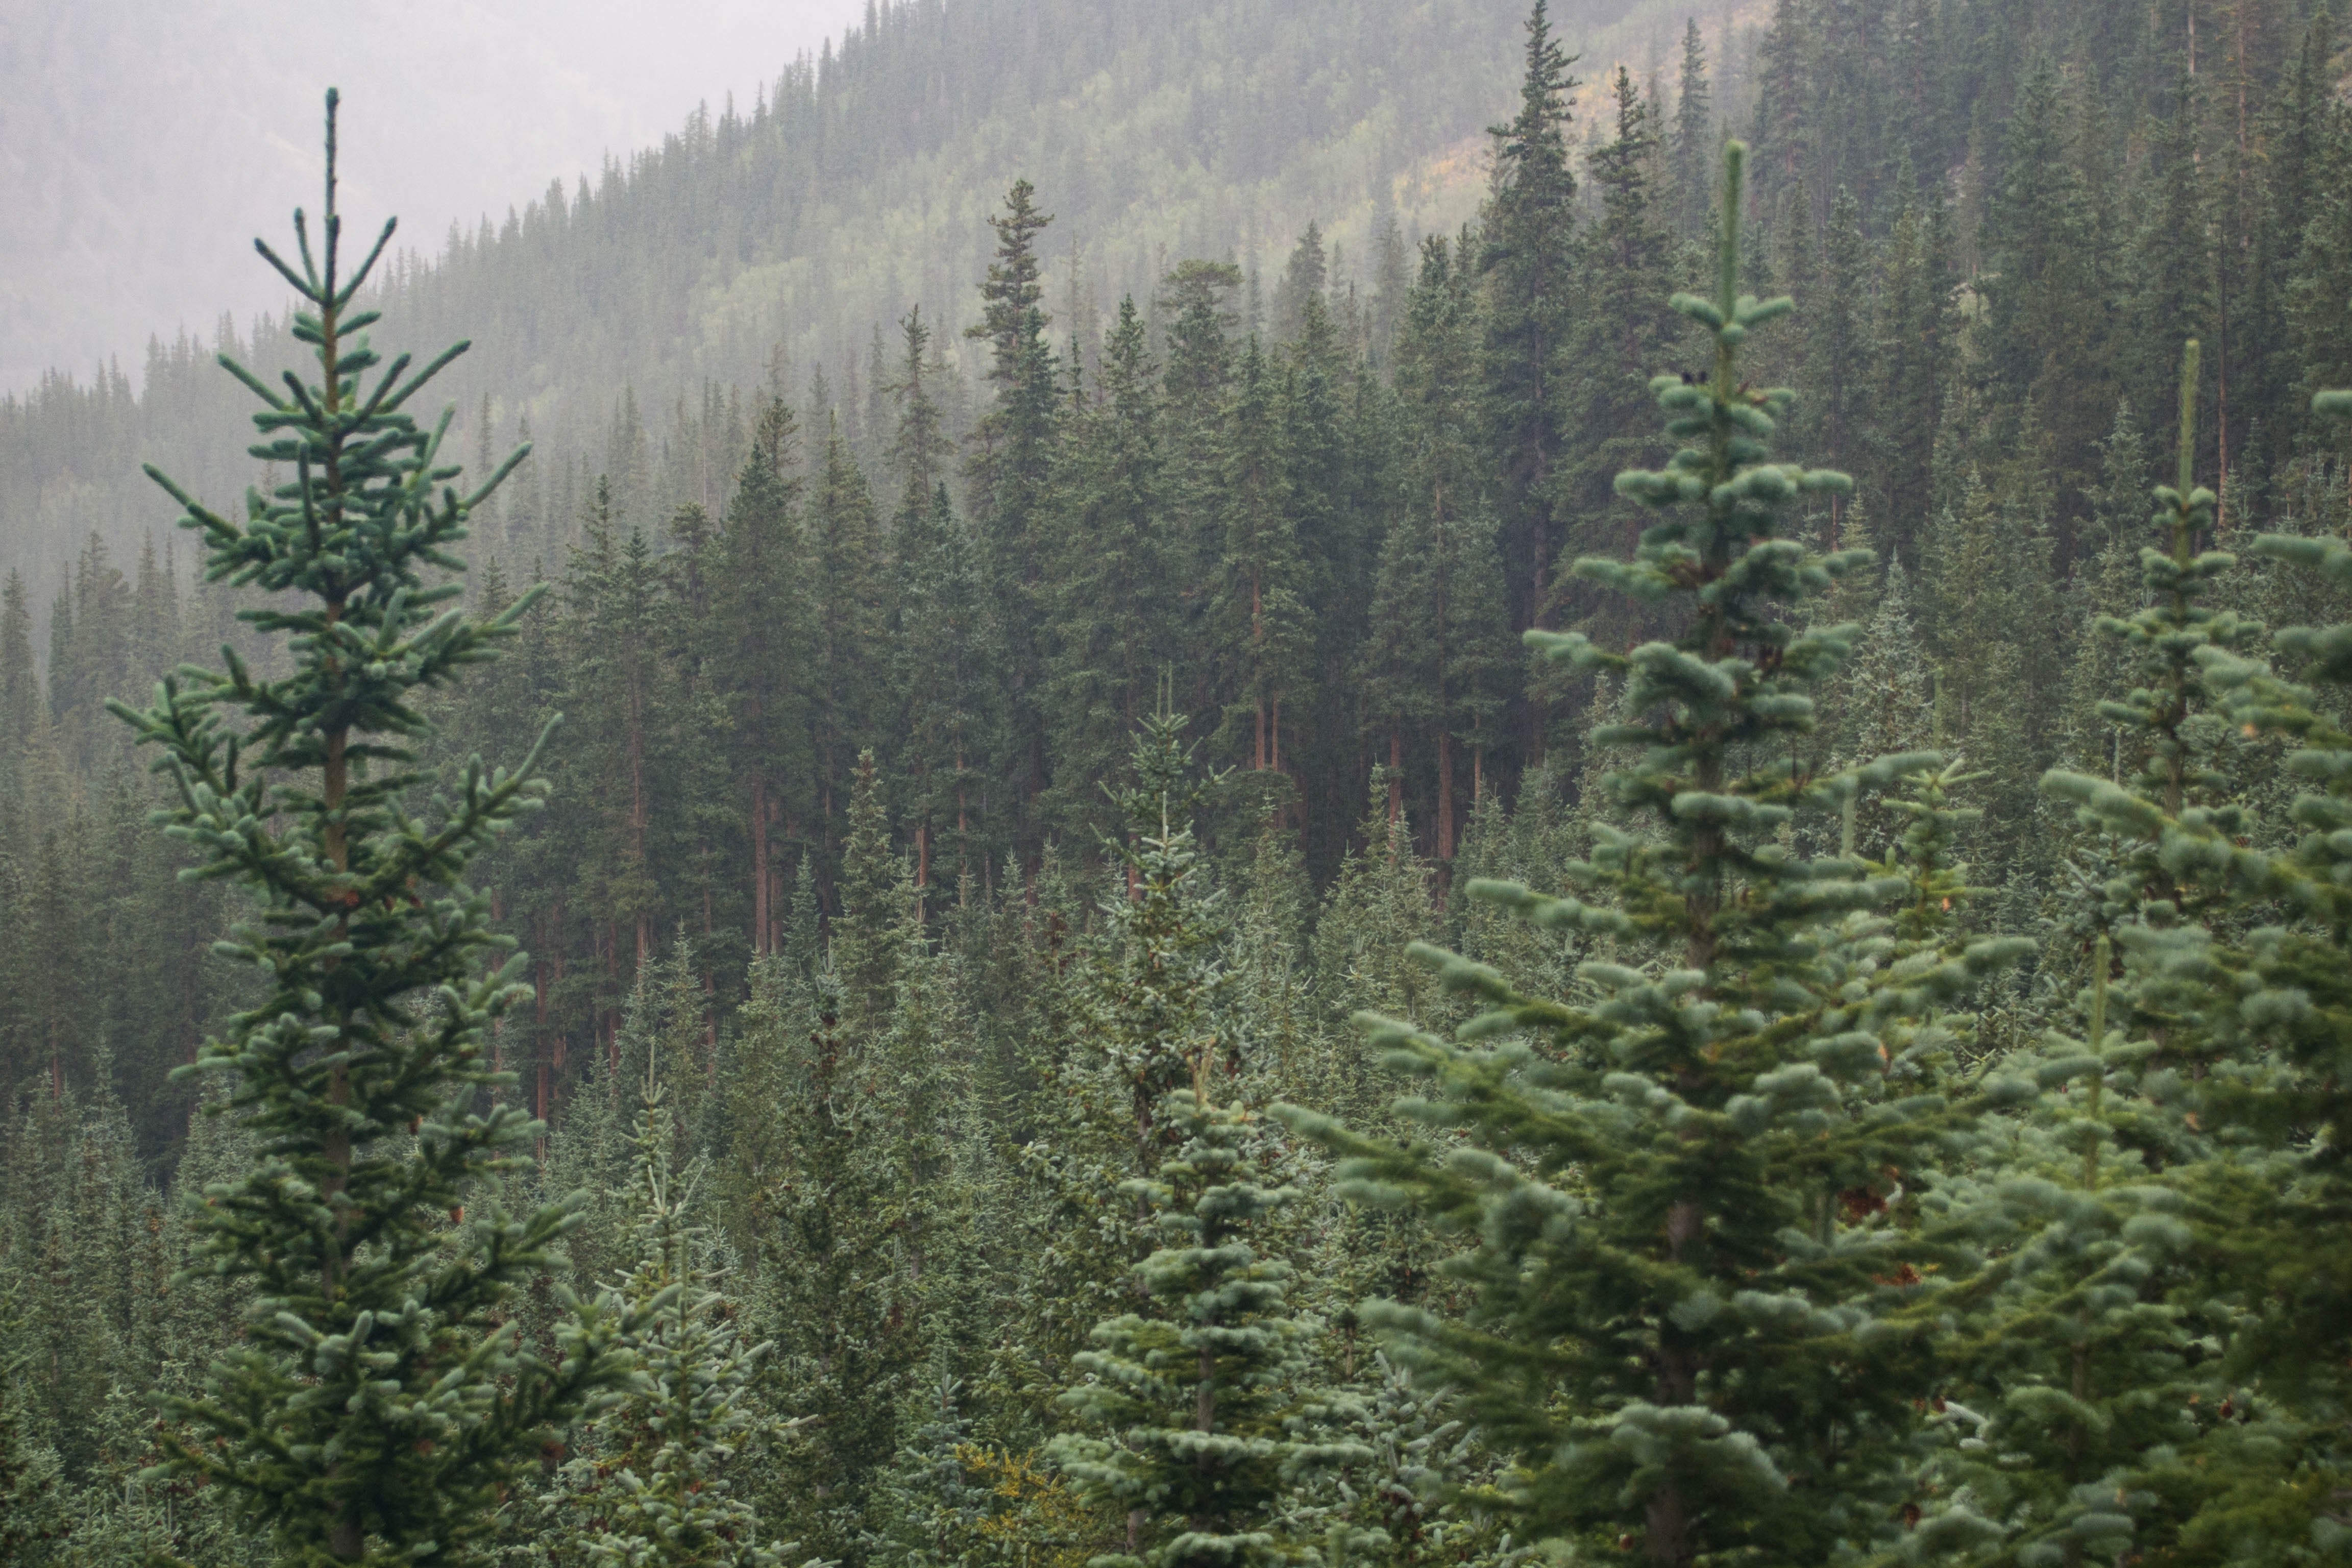 A Special Story of the Roger's Gardens Silvertip Fir